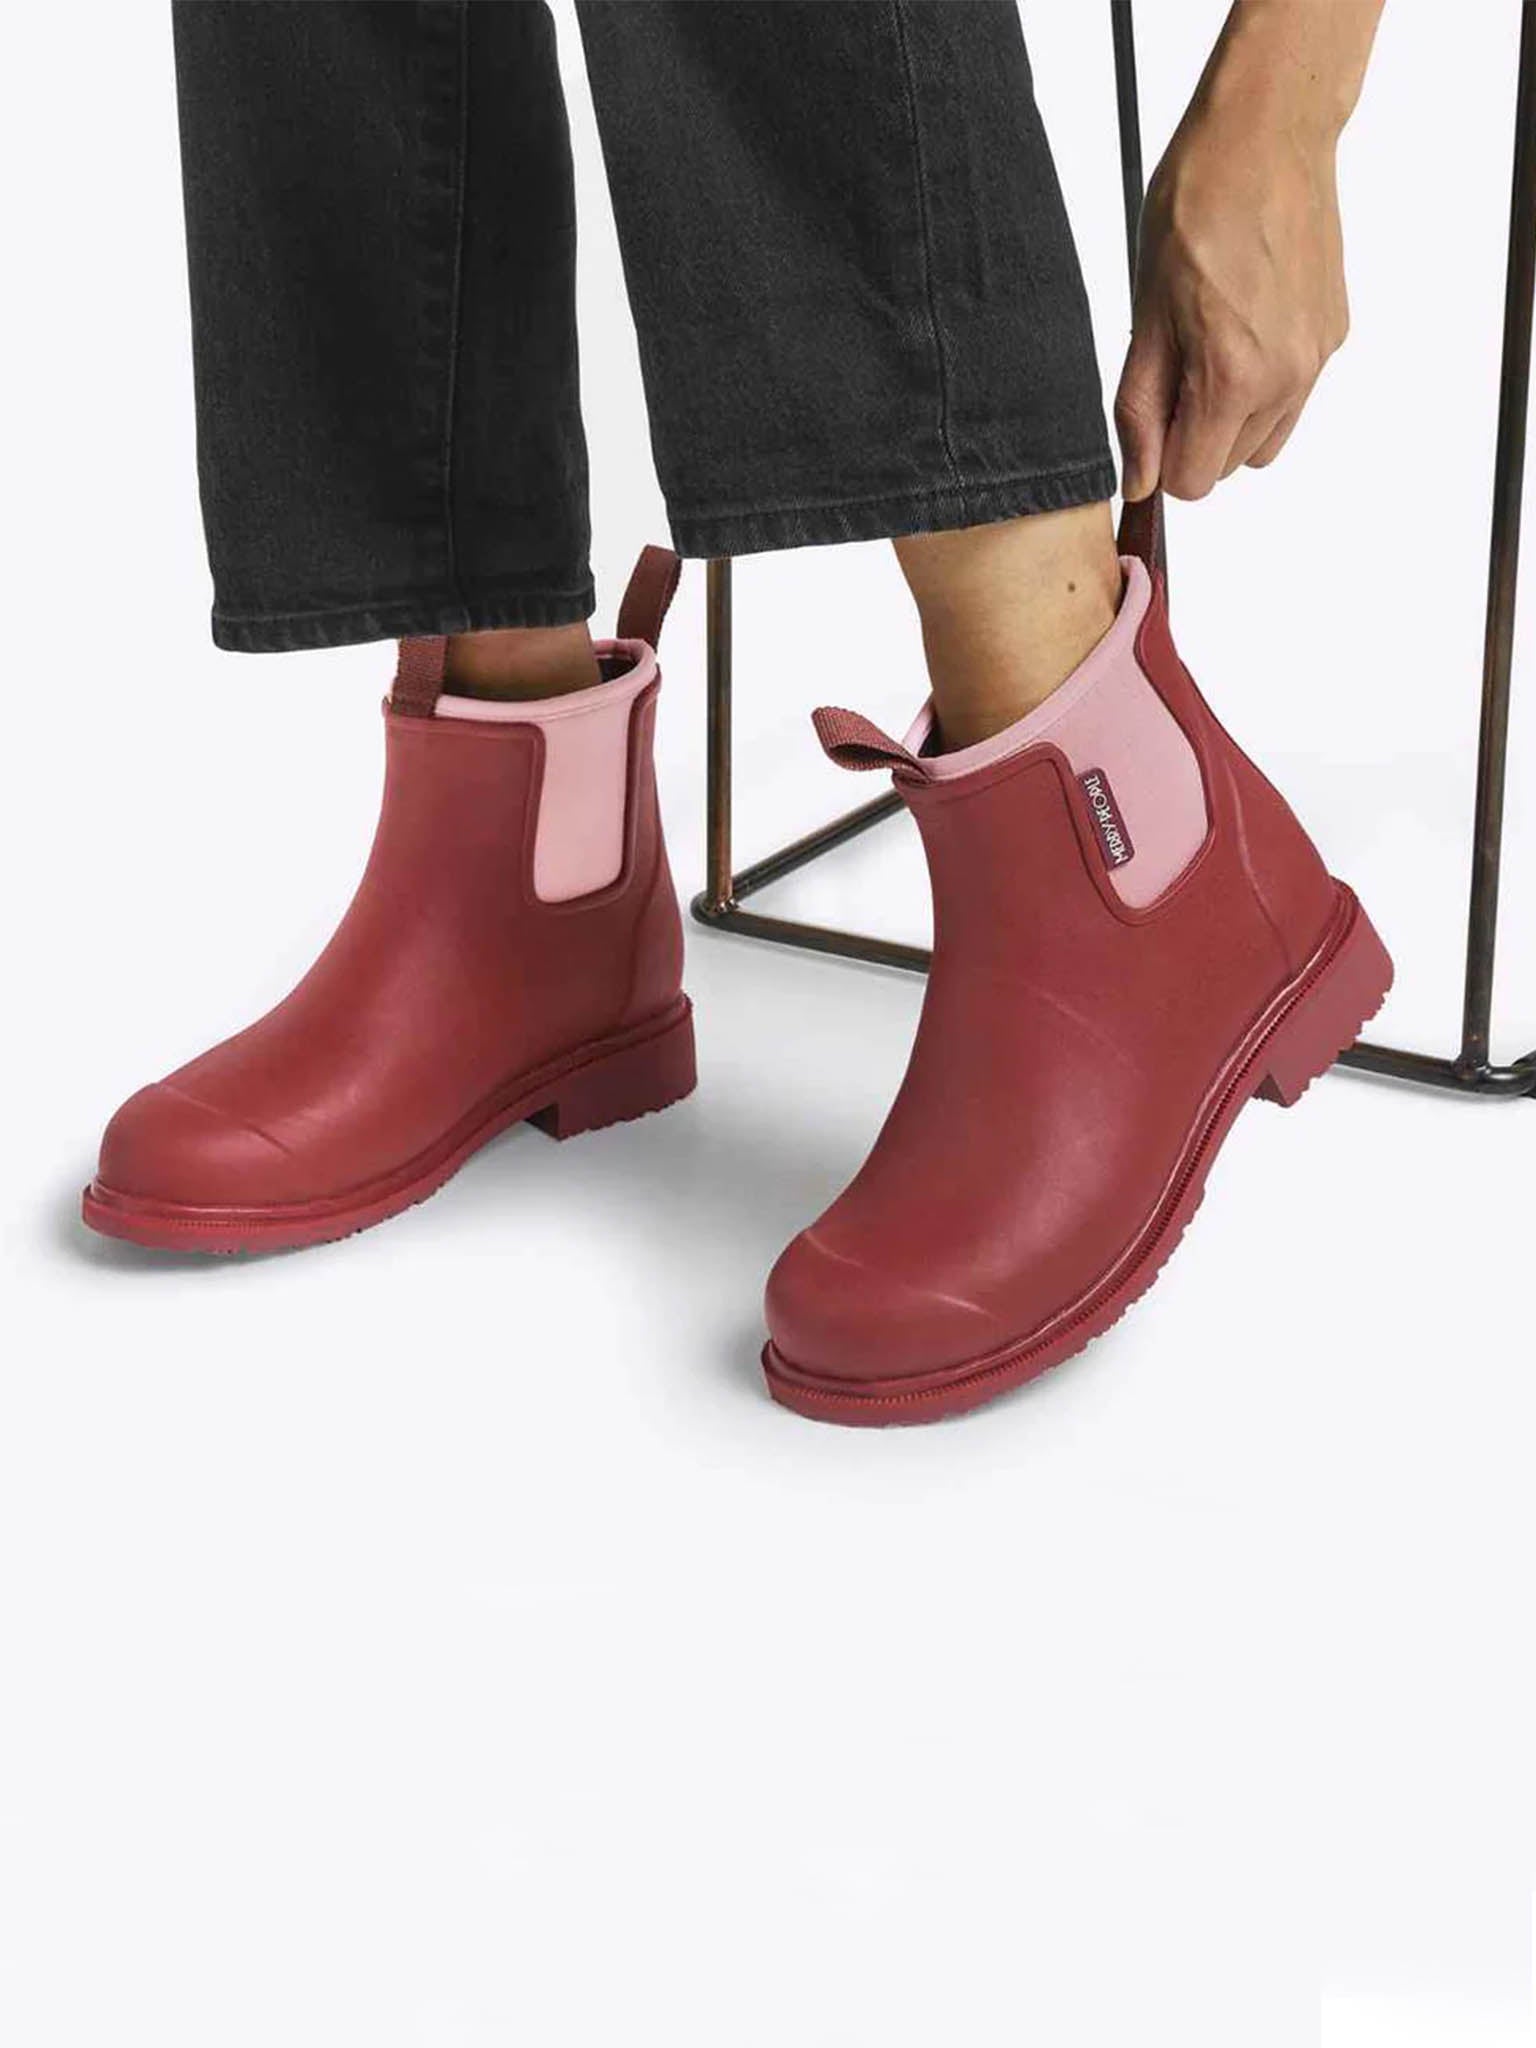 Merry People Red  & Pink Bobbi Ankle Wellington Boots On model